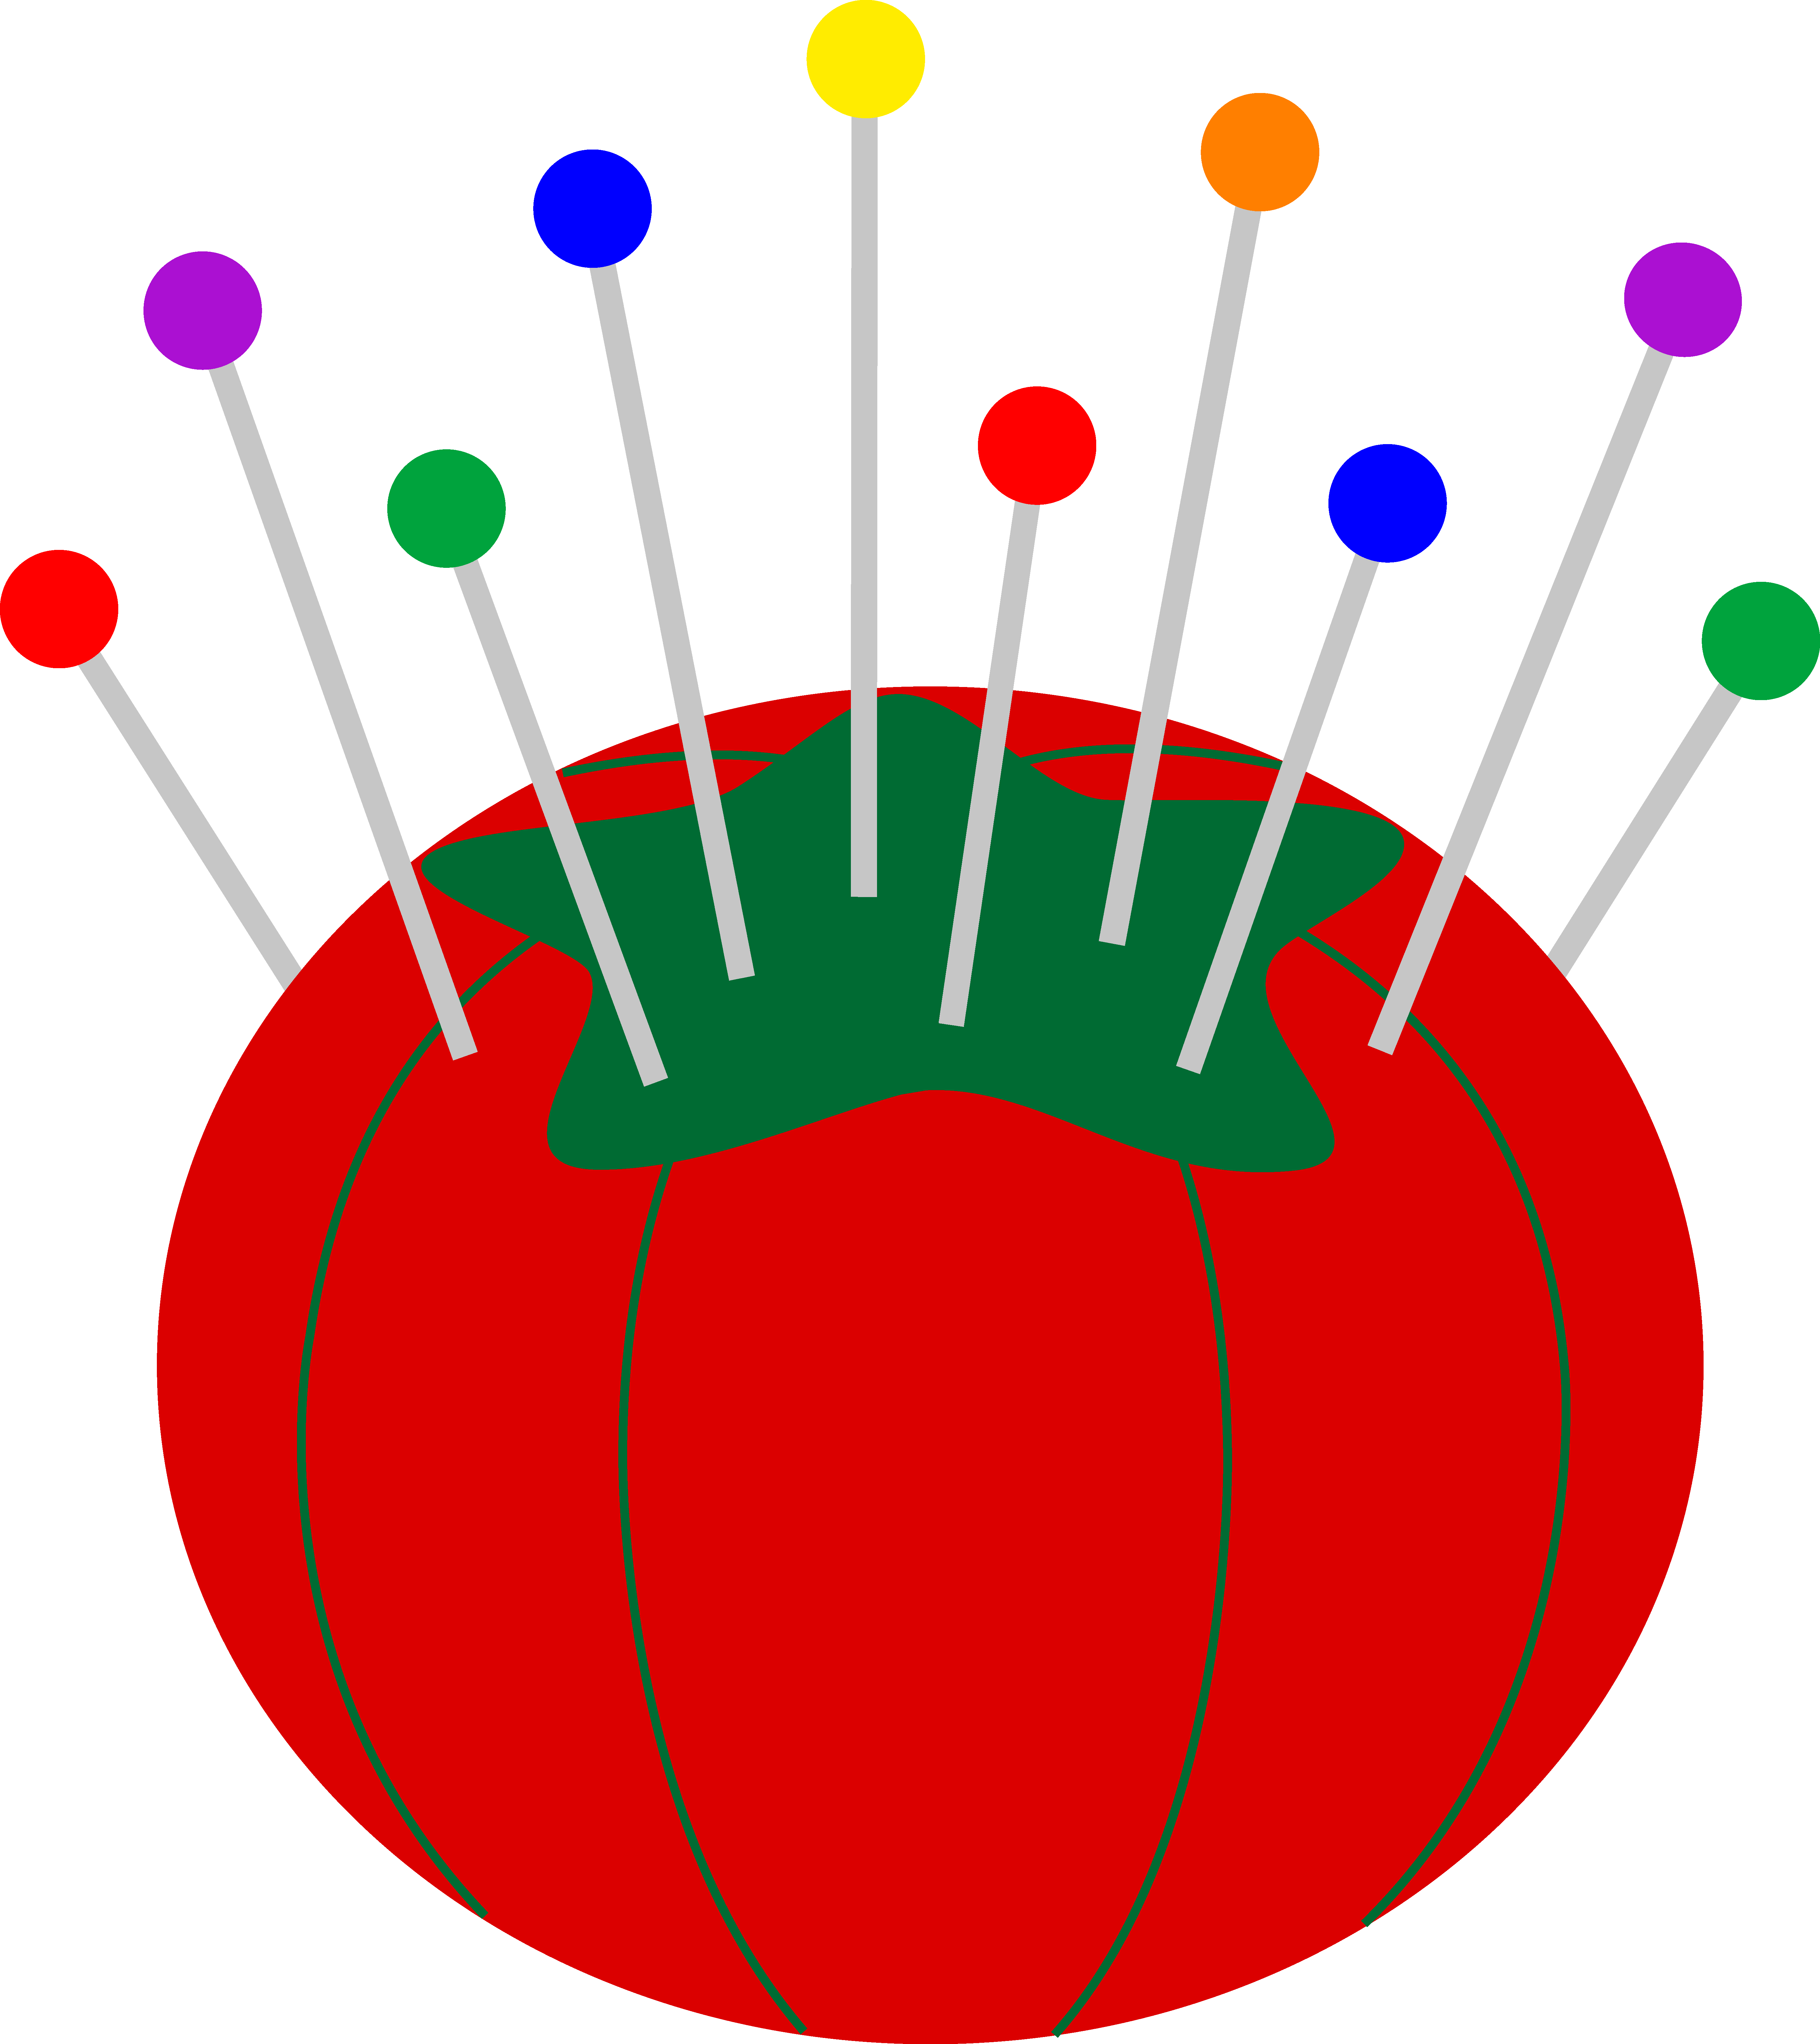 Free clip art of a cute red pin cushion with colorful pins